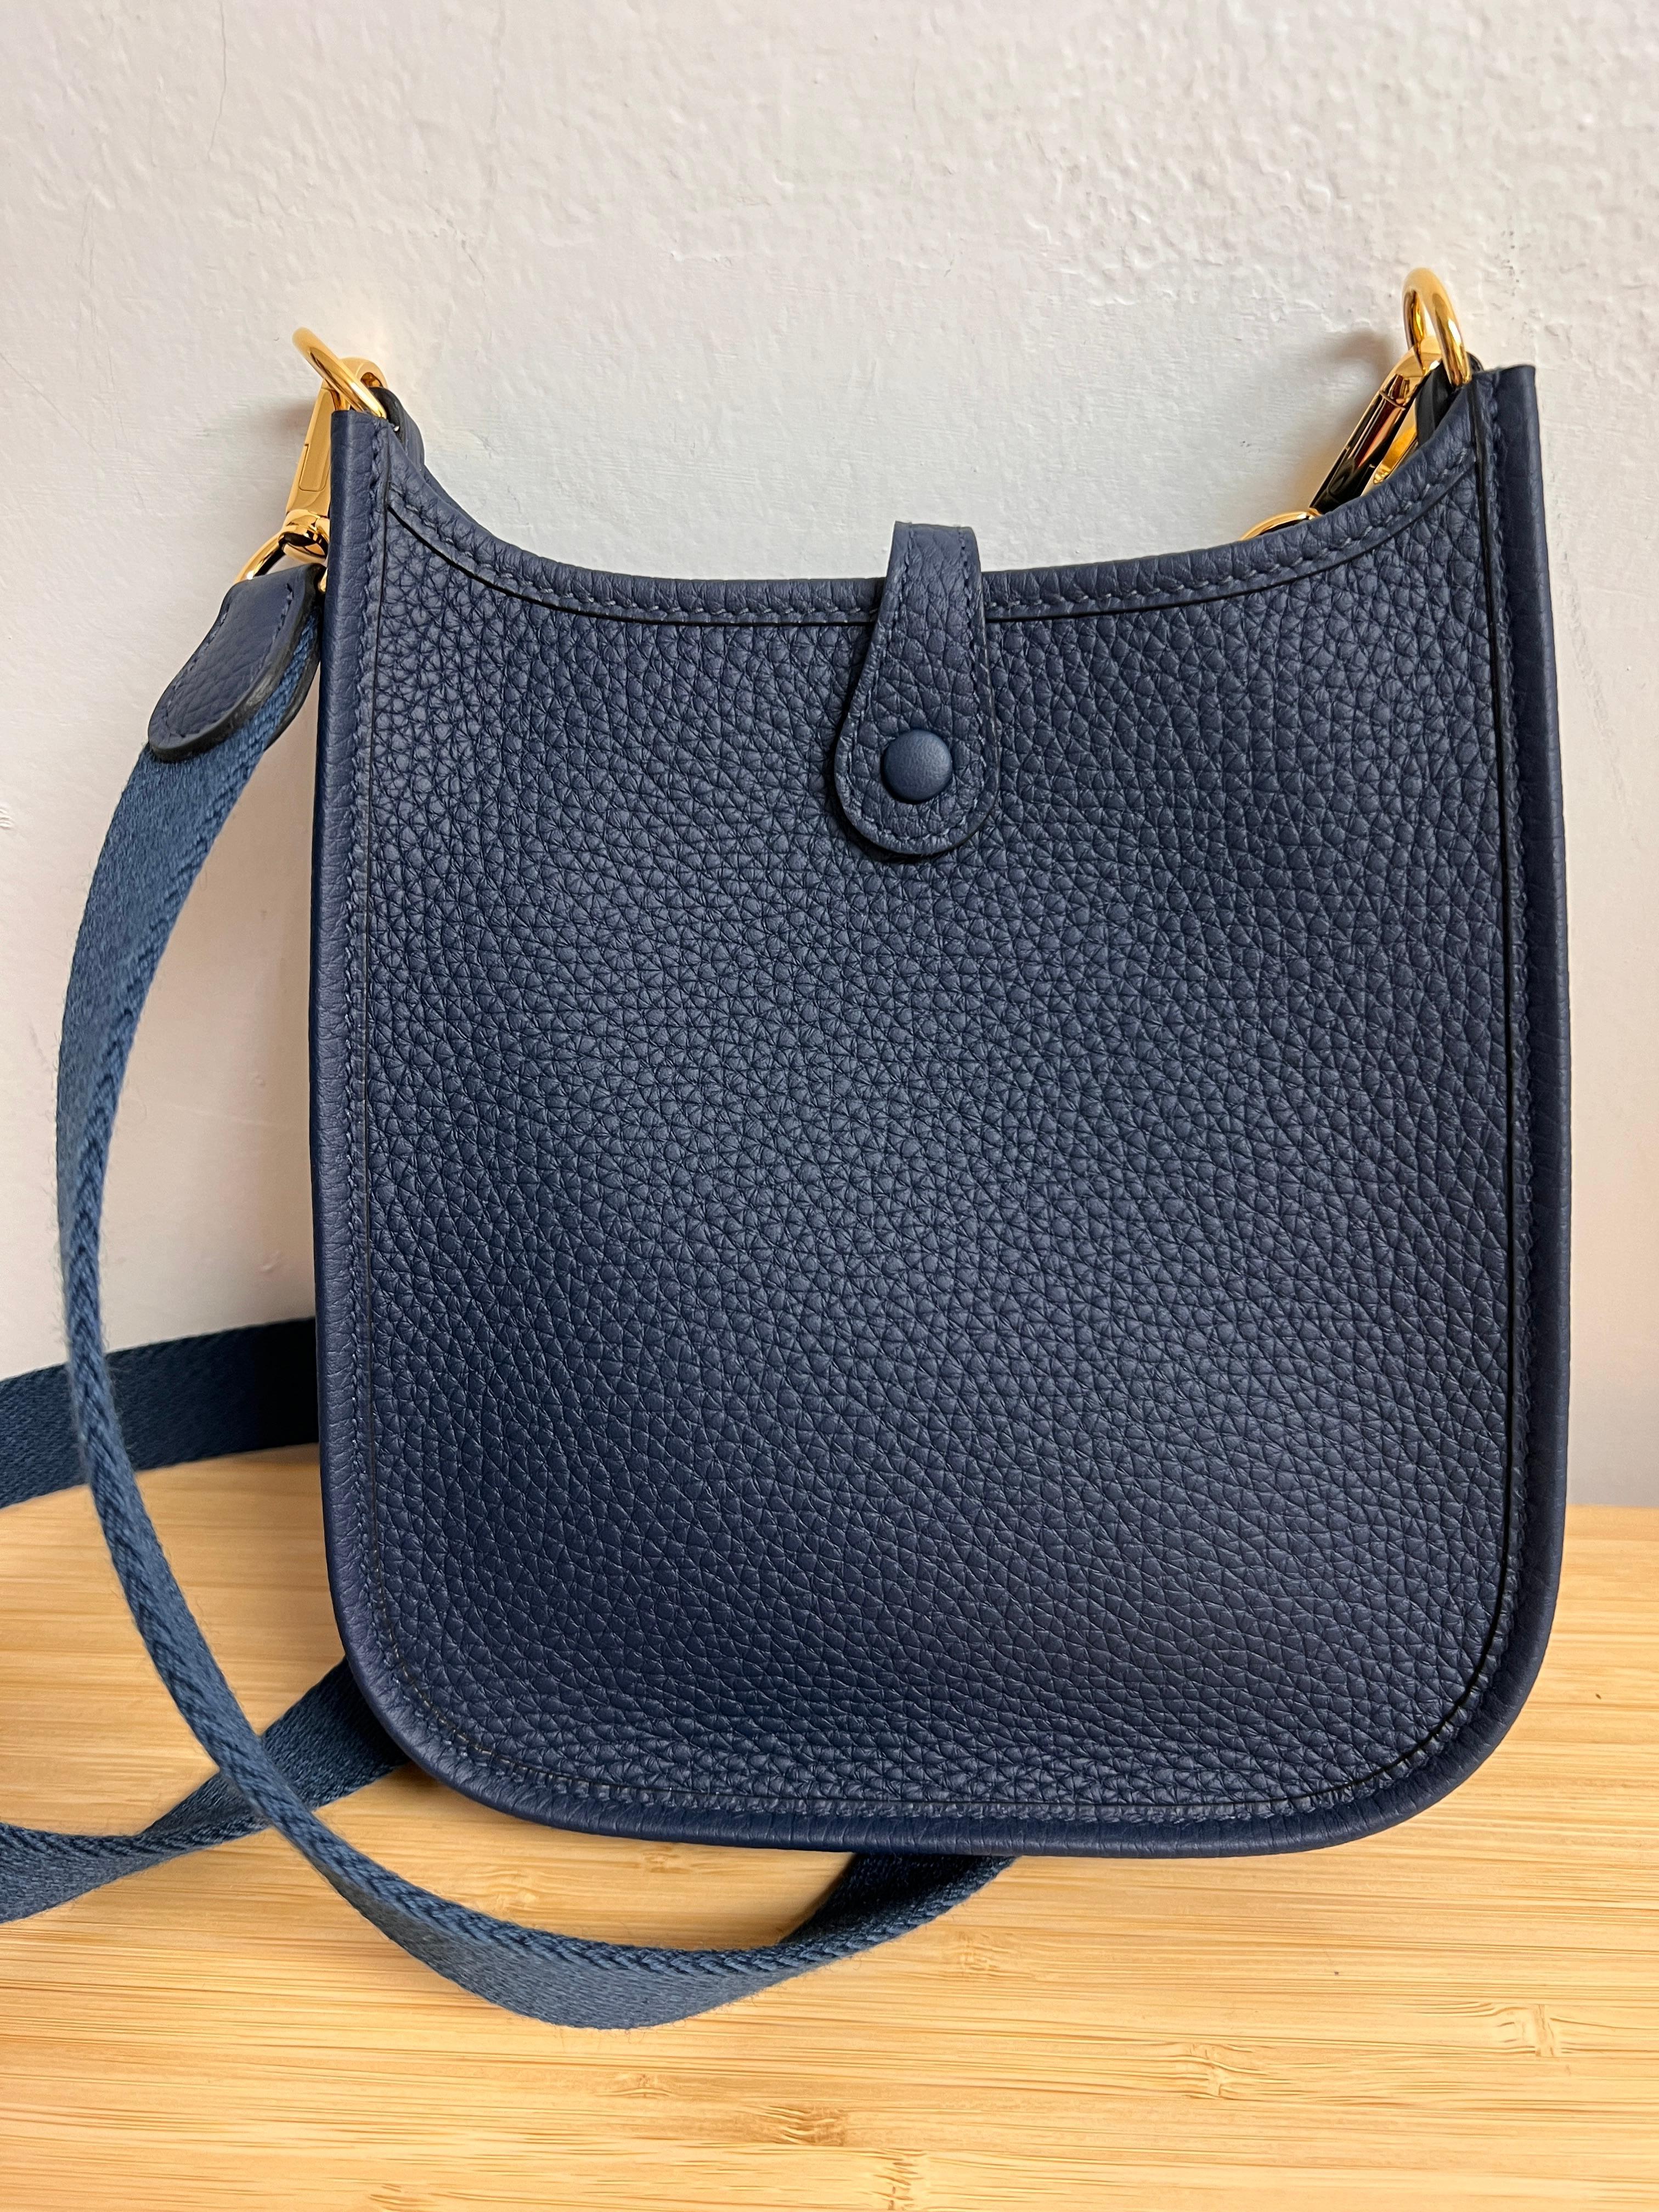 Hermes mini Evelyne TPM in Blue de Prusse Clemence Leather and golden hardware.

New never used, full set with box, dustbag and ribbon.